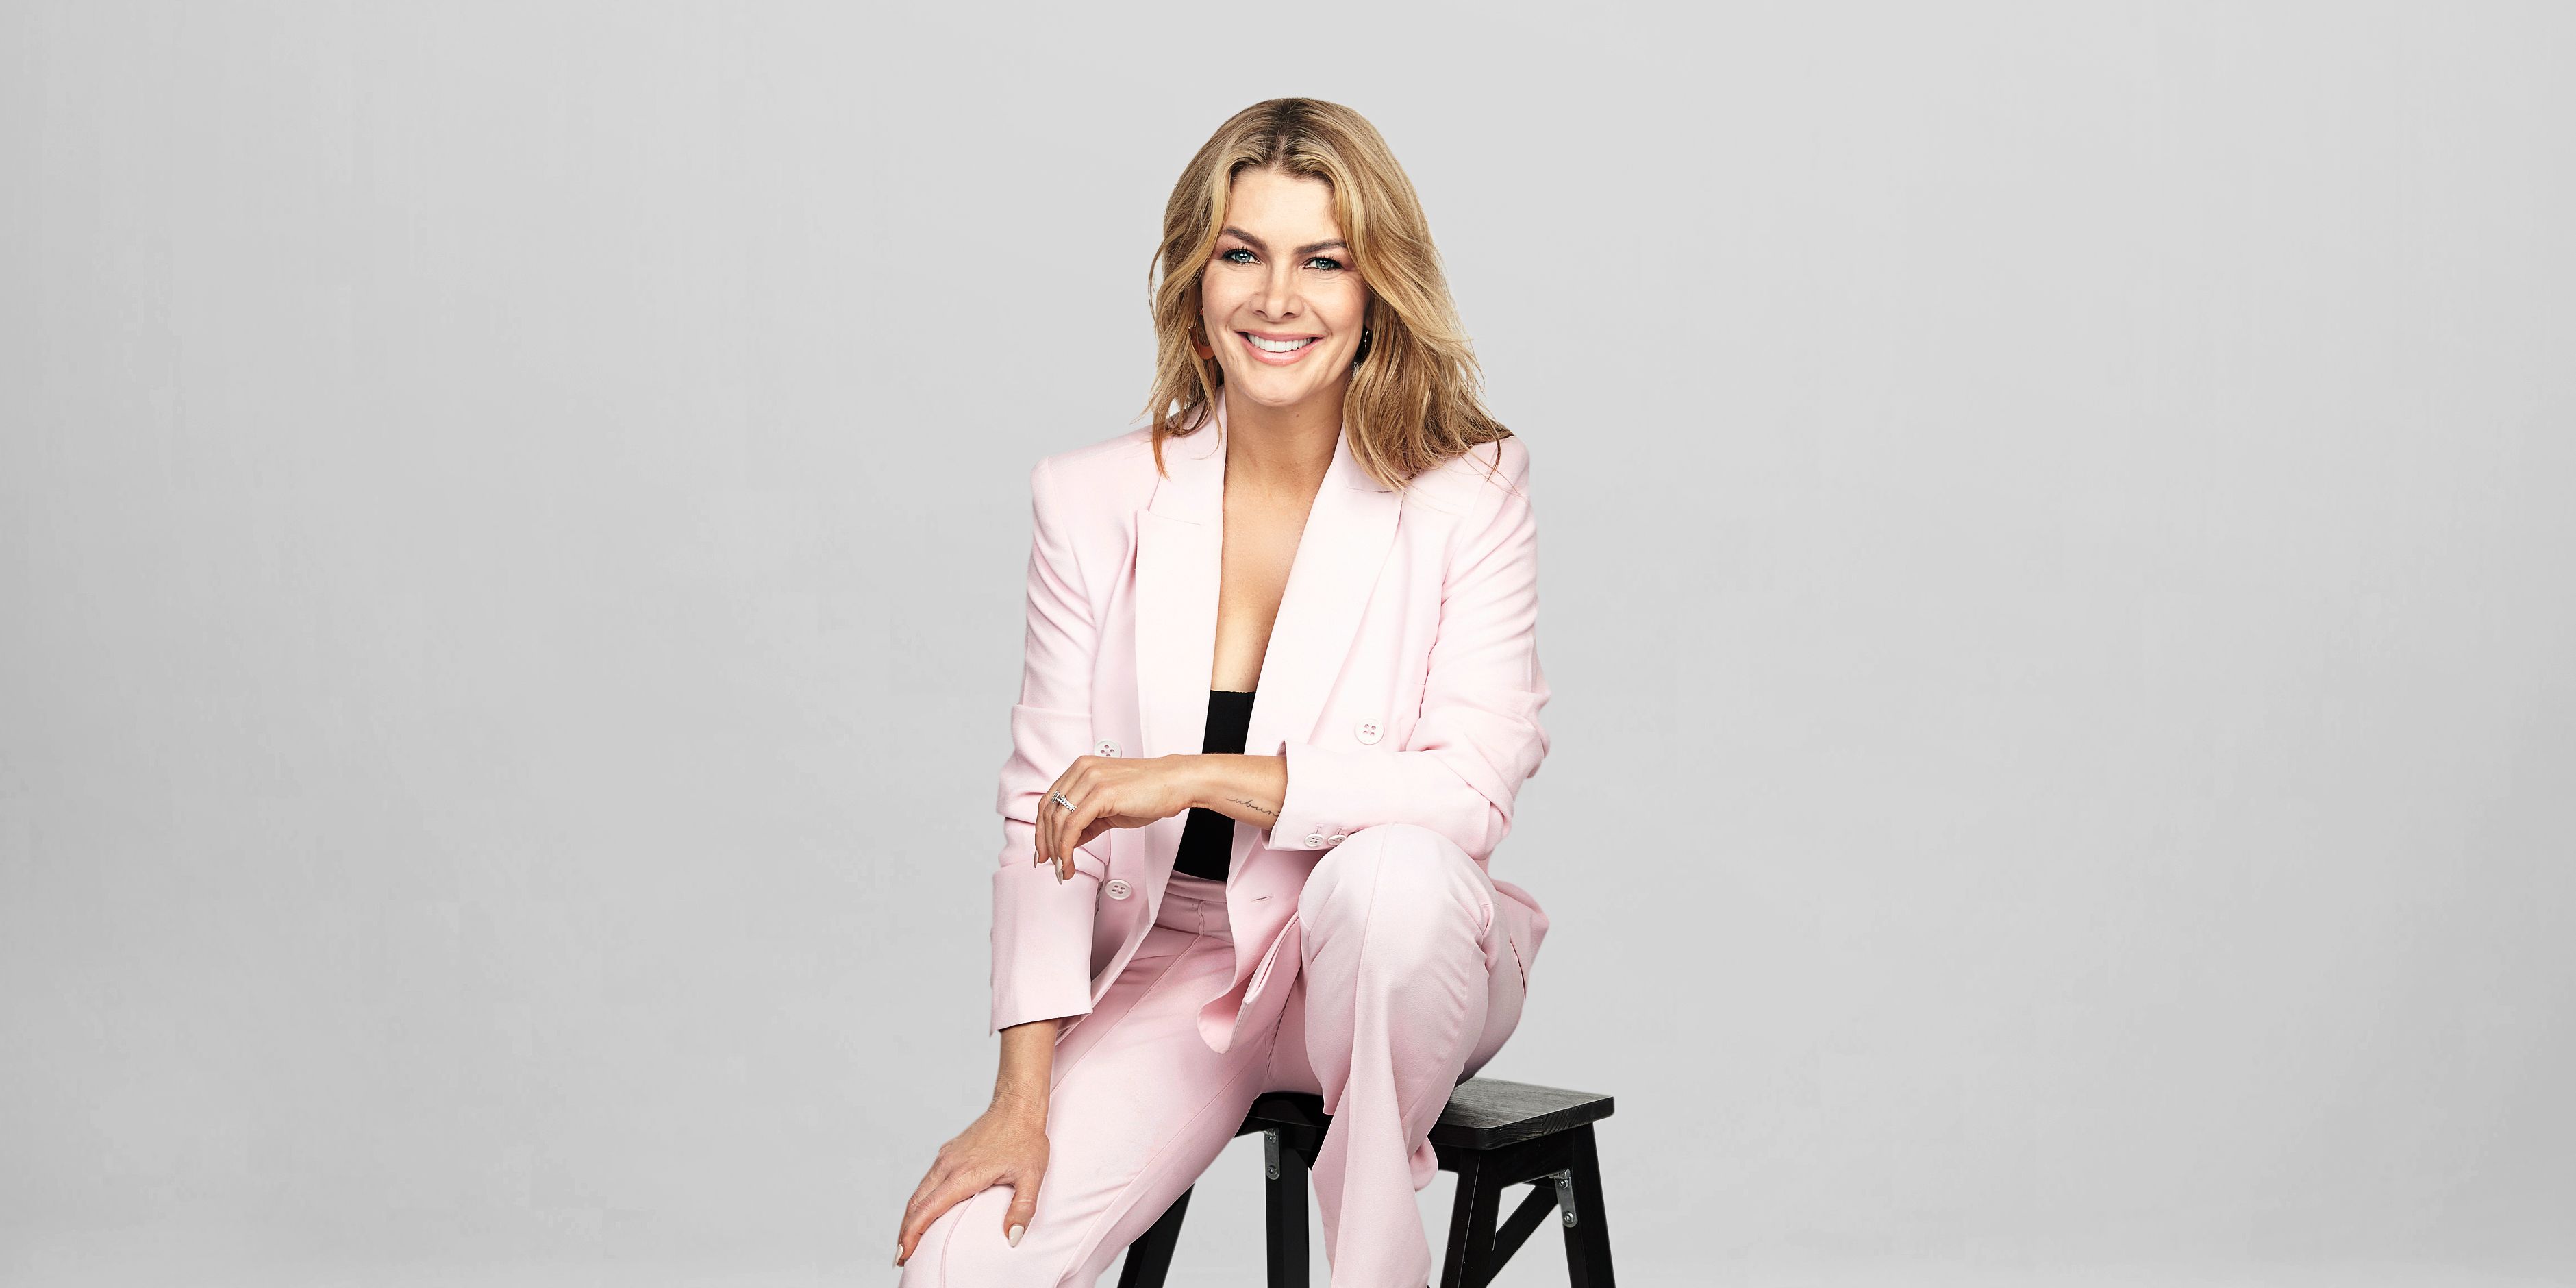 TV presenter Natalie Bassingthwaighte on why her new hosting role on Changing Rooms is the best fit yet